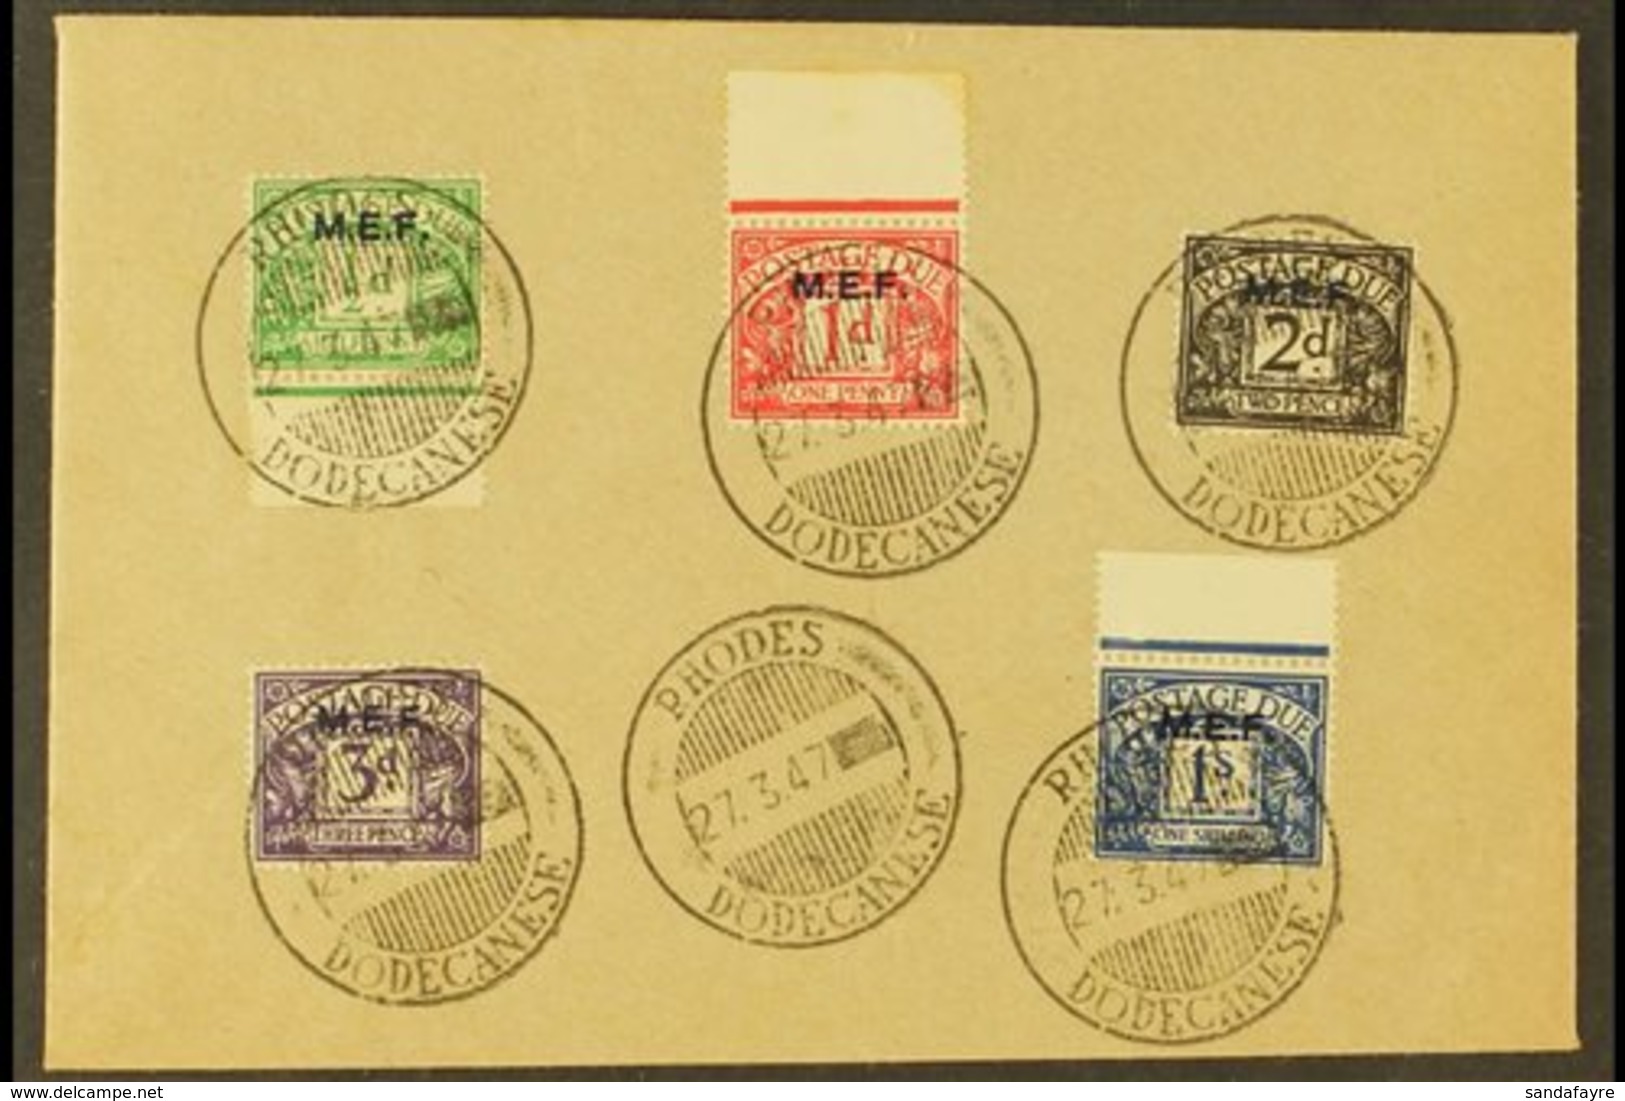 POSTAGE DUES 1942 "M.E.F." Overprints Complete Set (SG D1/5) On Unaddressed Philatelic Cover Tied By Superb "Rhodes / Do - Italian Eastern Africa